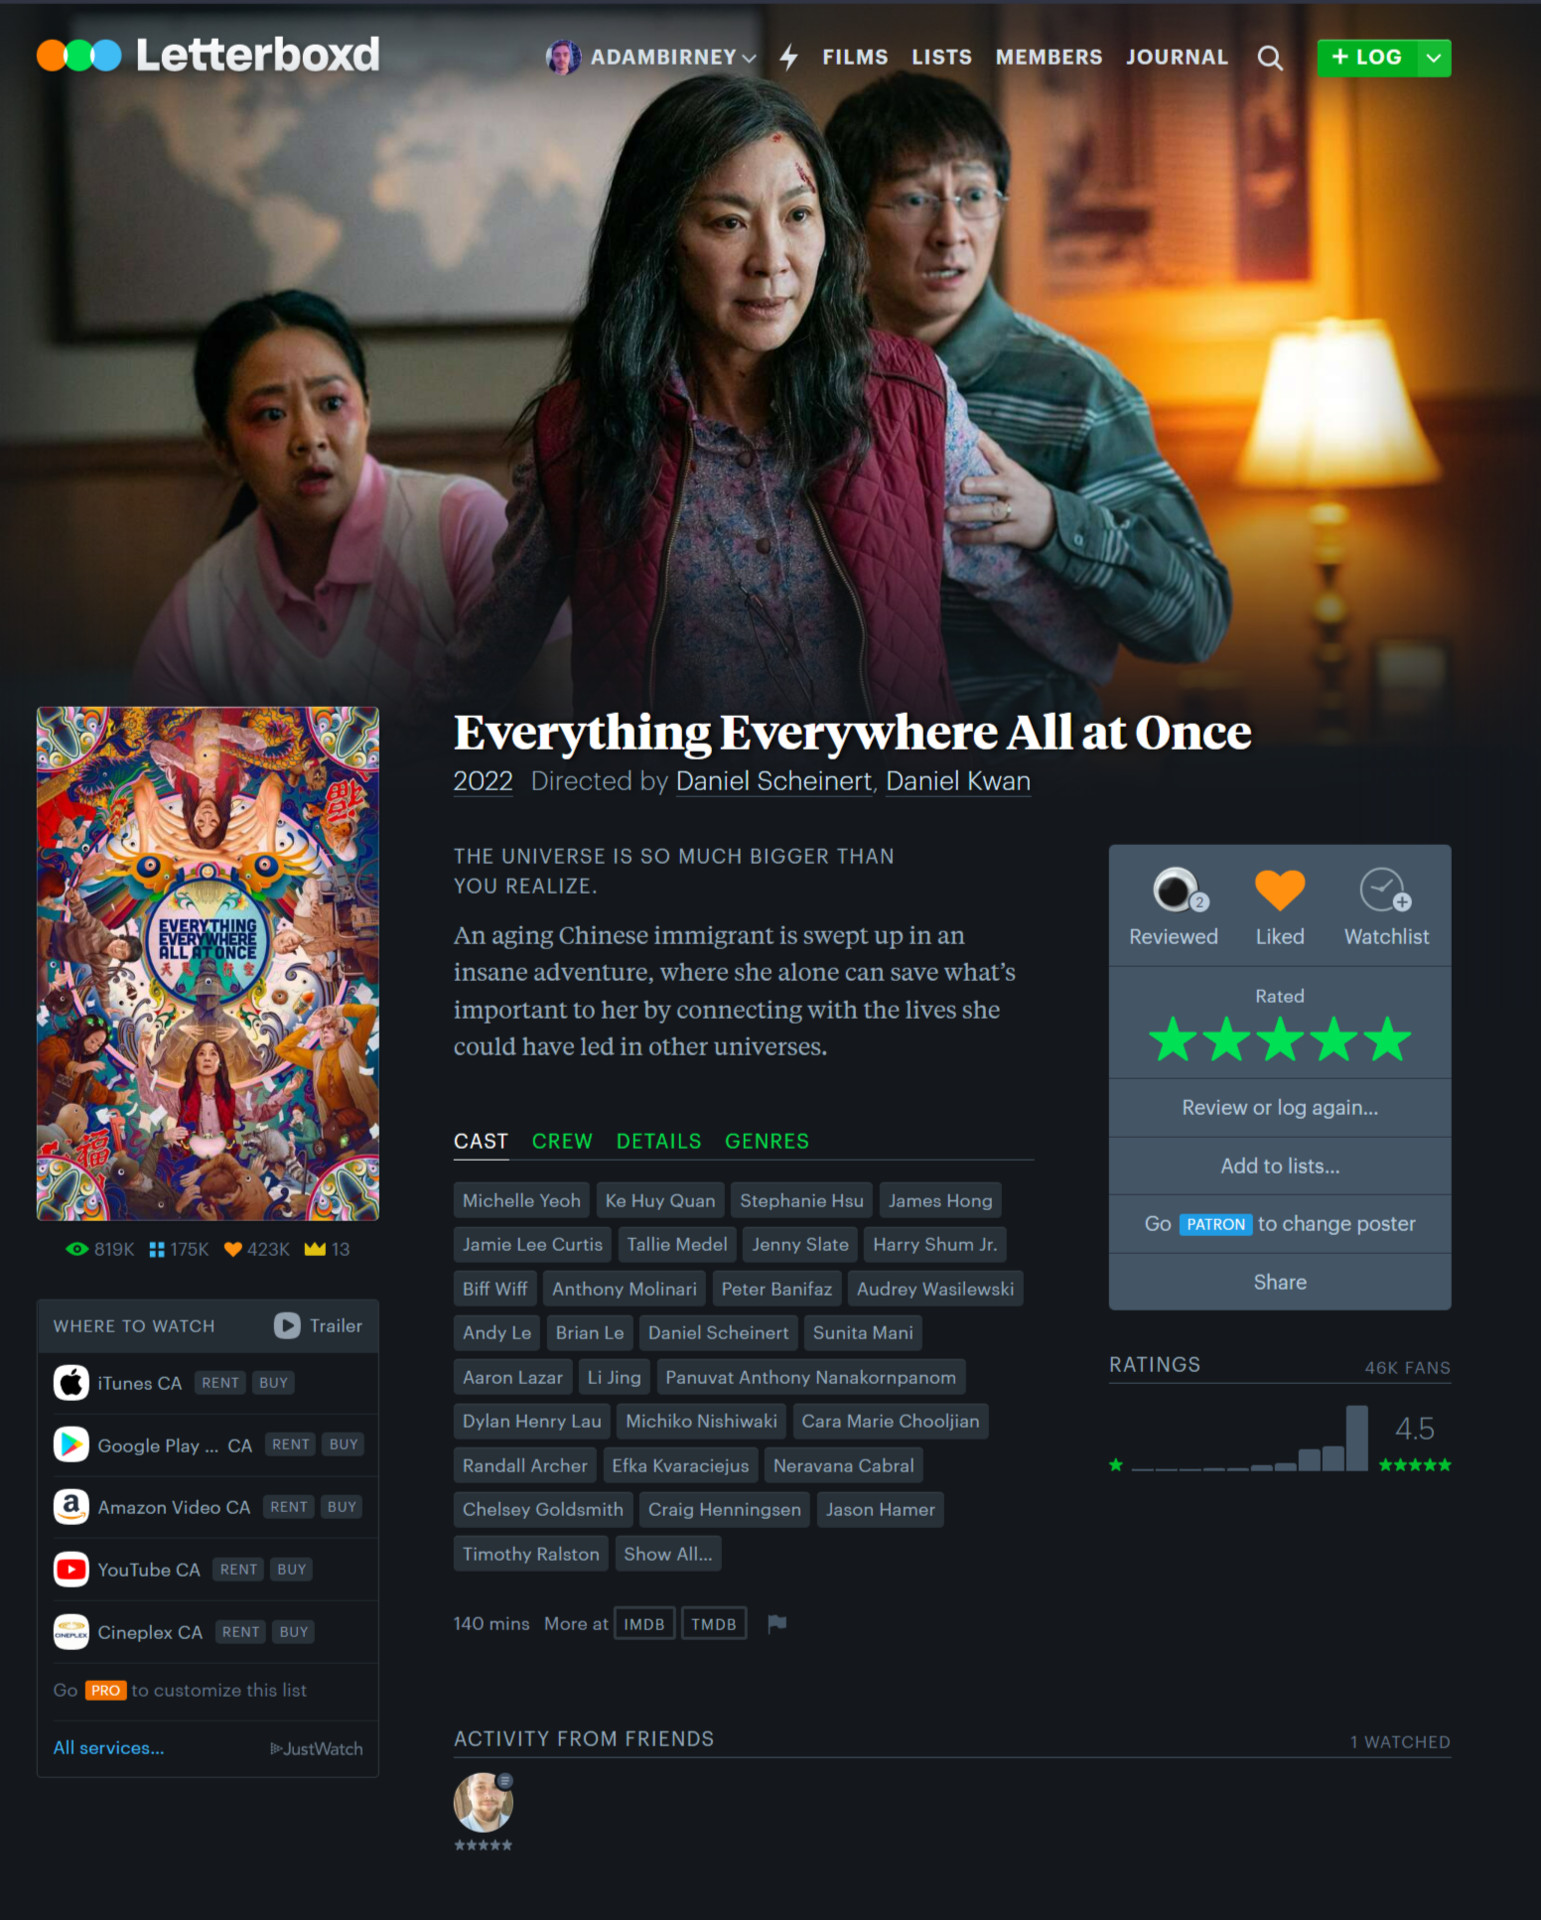 Letterboxd film page example